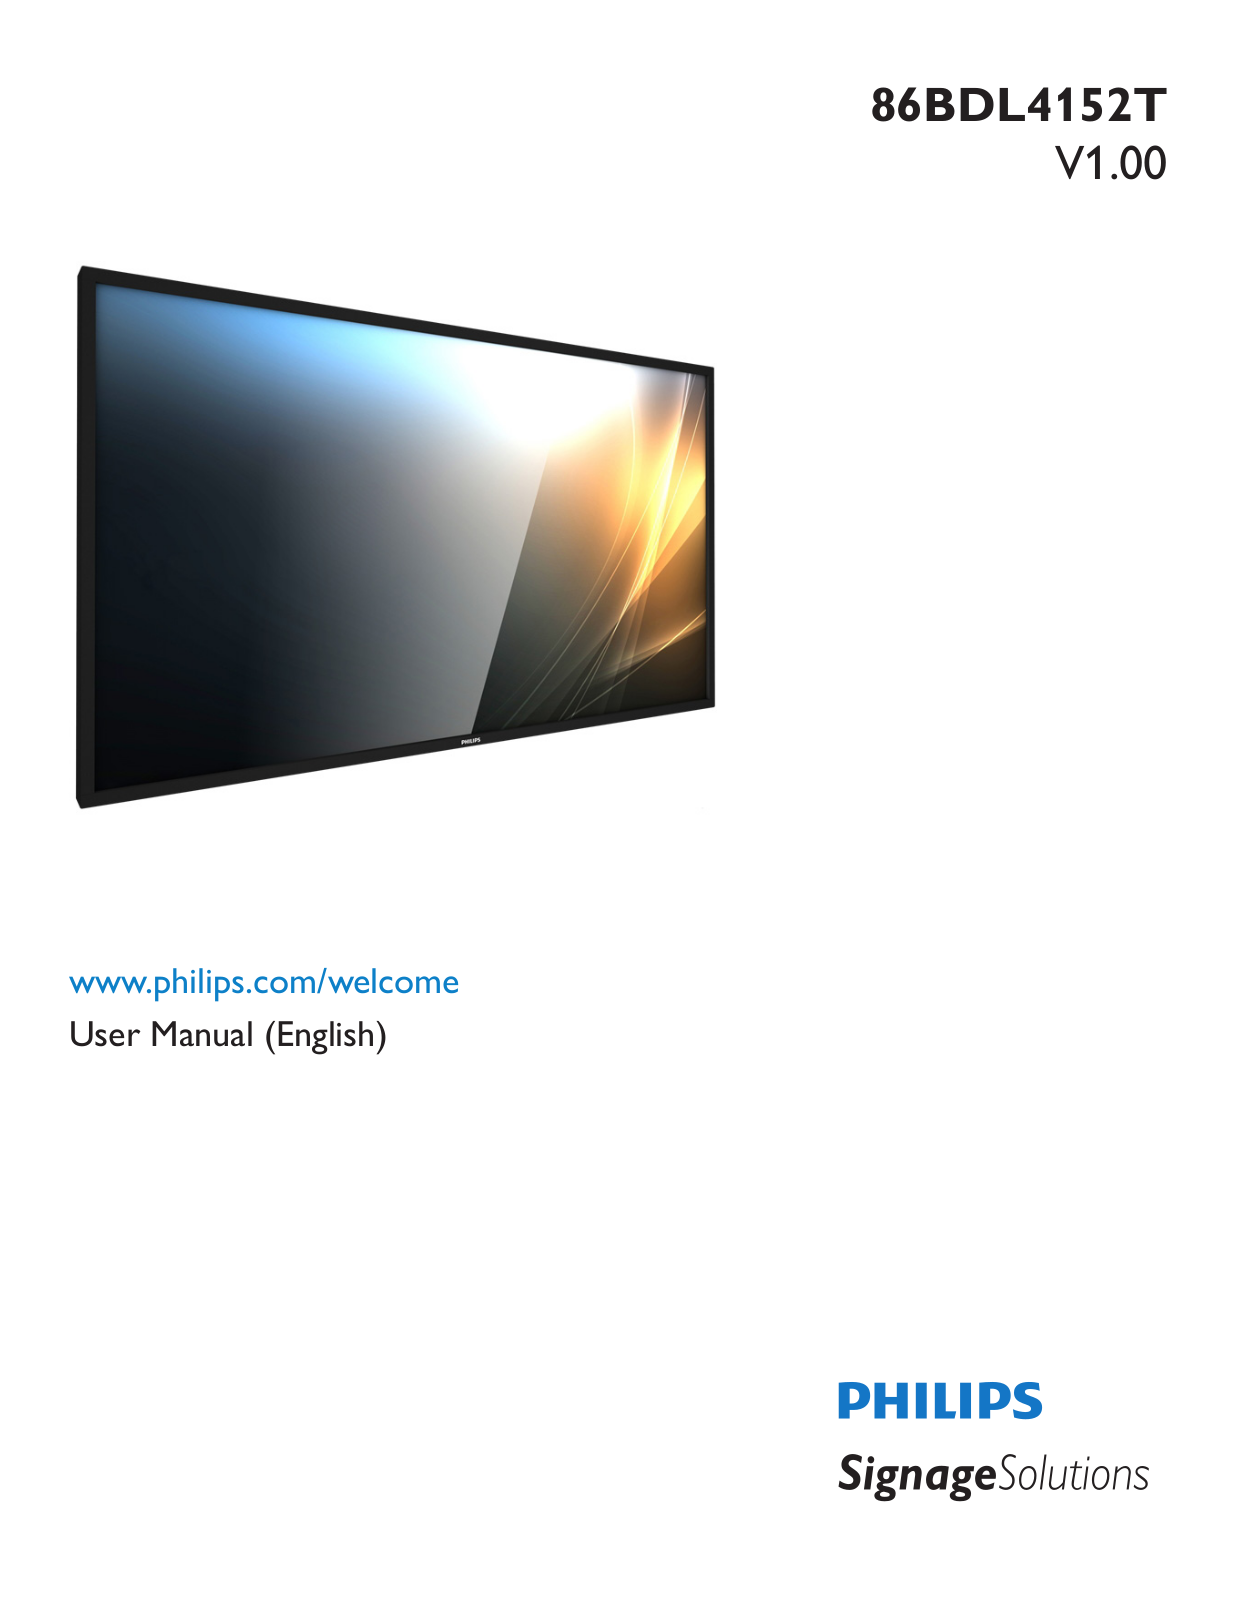 Philips 86BDL4152T User Manual